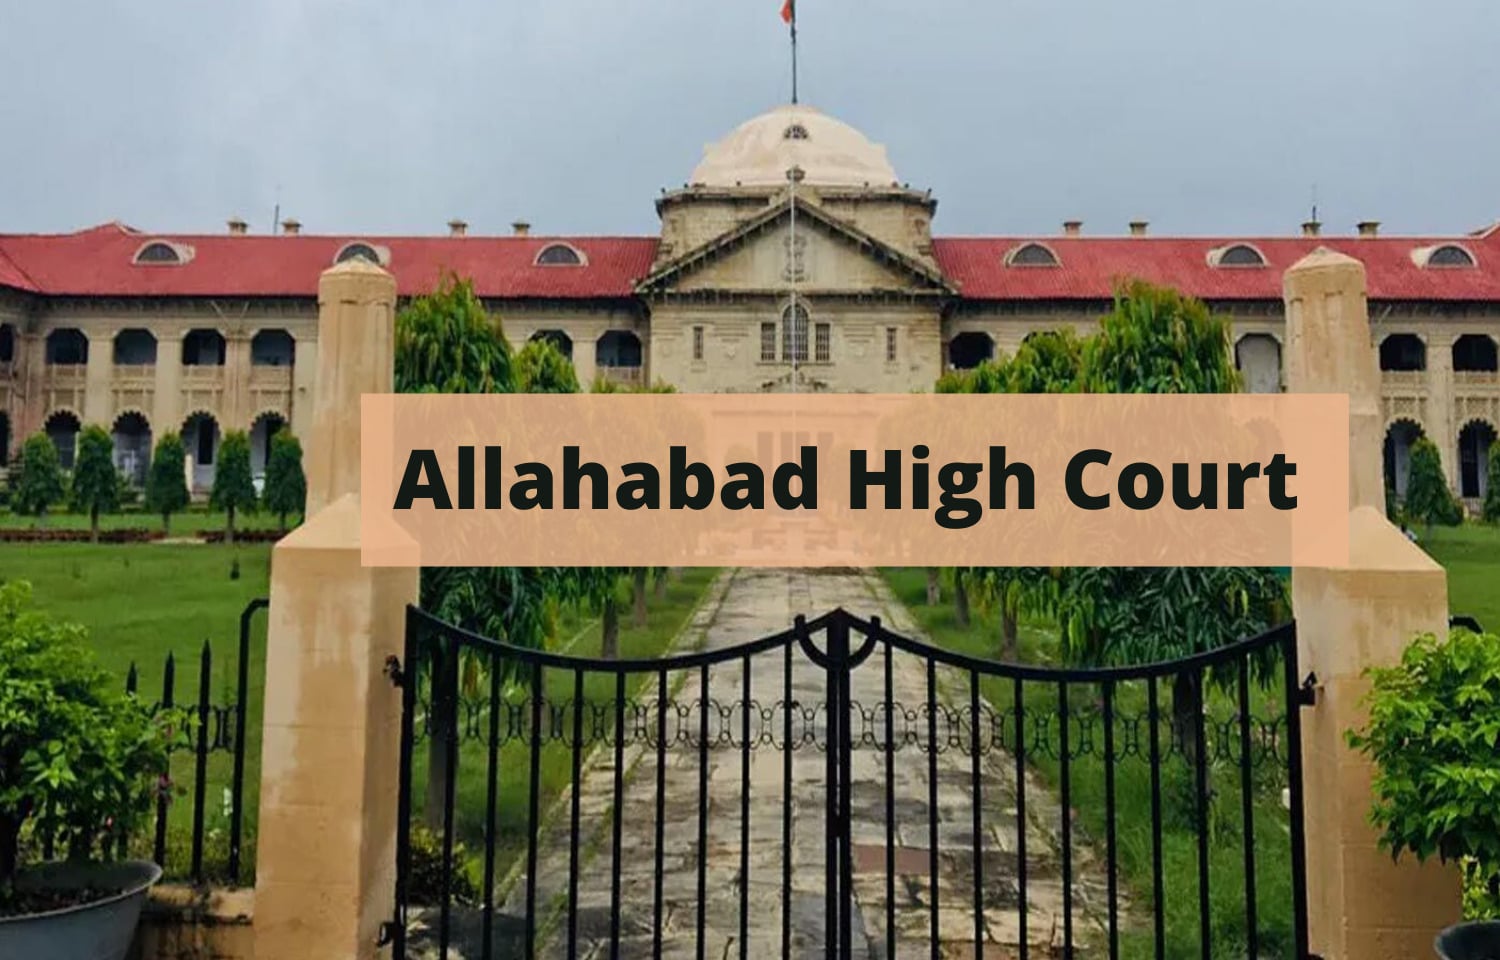 Allahabad High Court: AHC 2022 Result Out: Additional Private Secretary ENGLISH And HINDI Final result out 2022